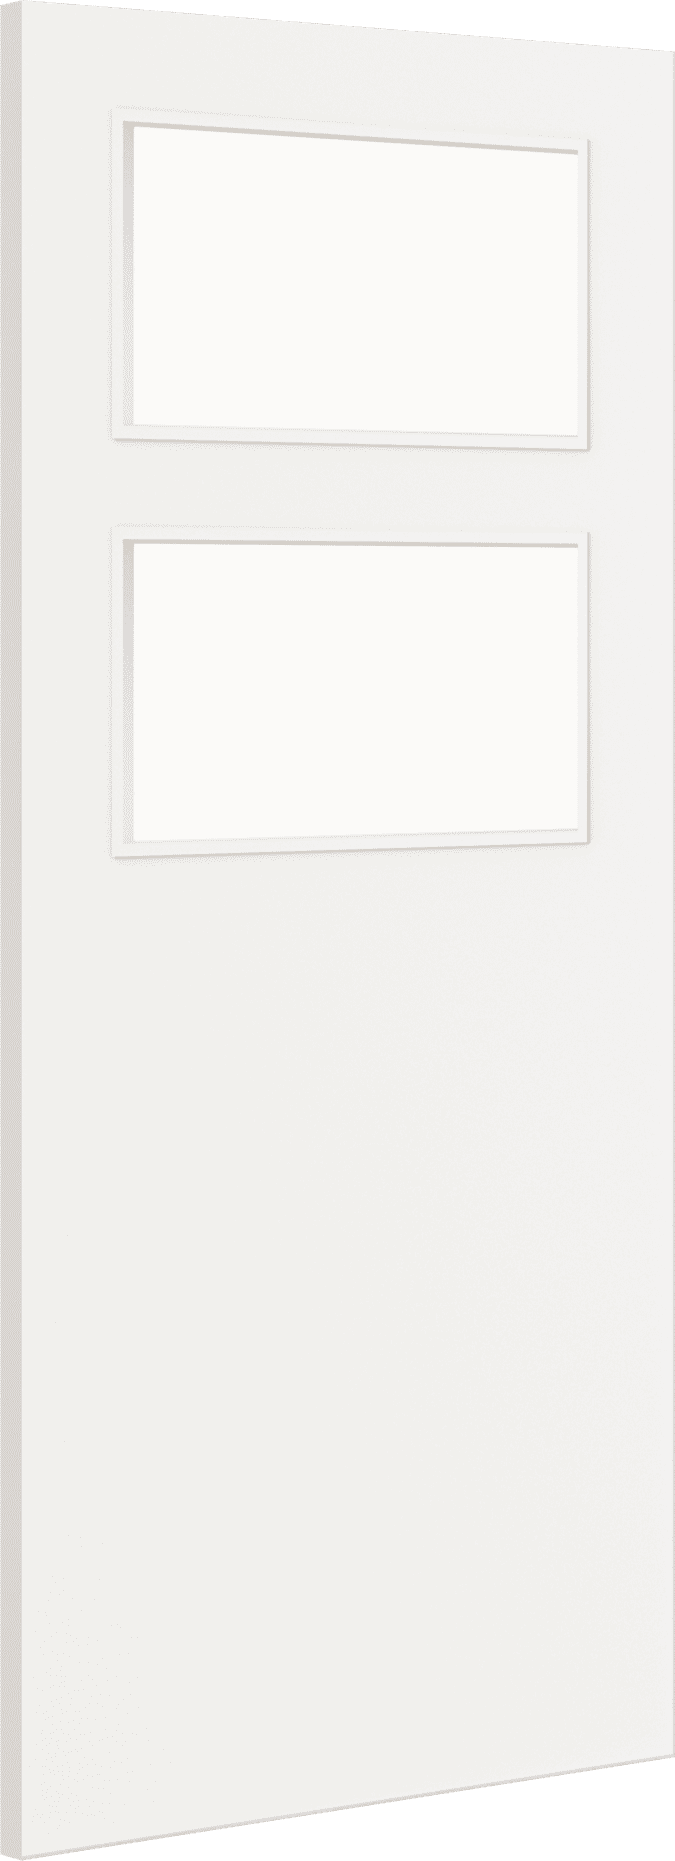 1981mm x 838mm x 44mm (33") Architectural Paint Grade White 02 Frosted Glazed Fire Door Blank